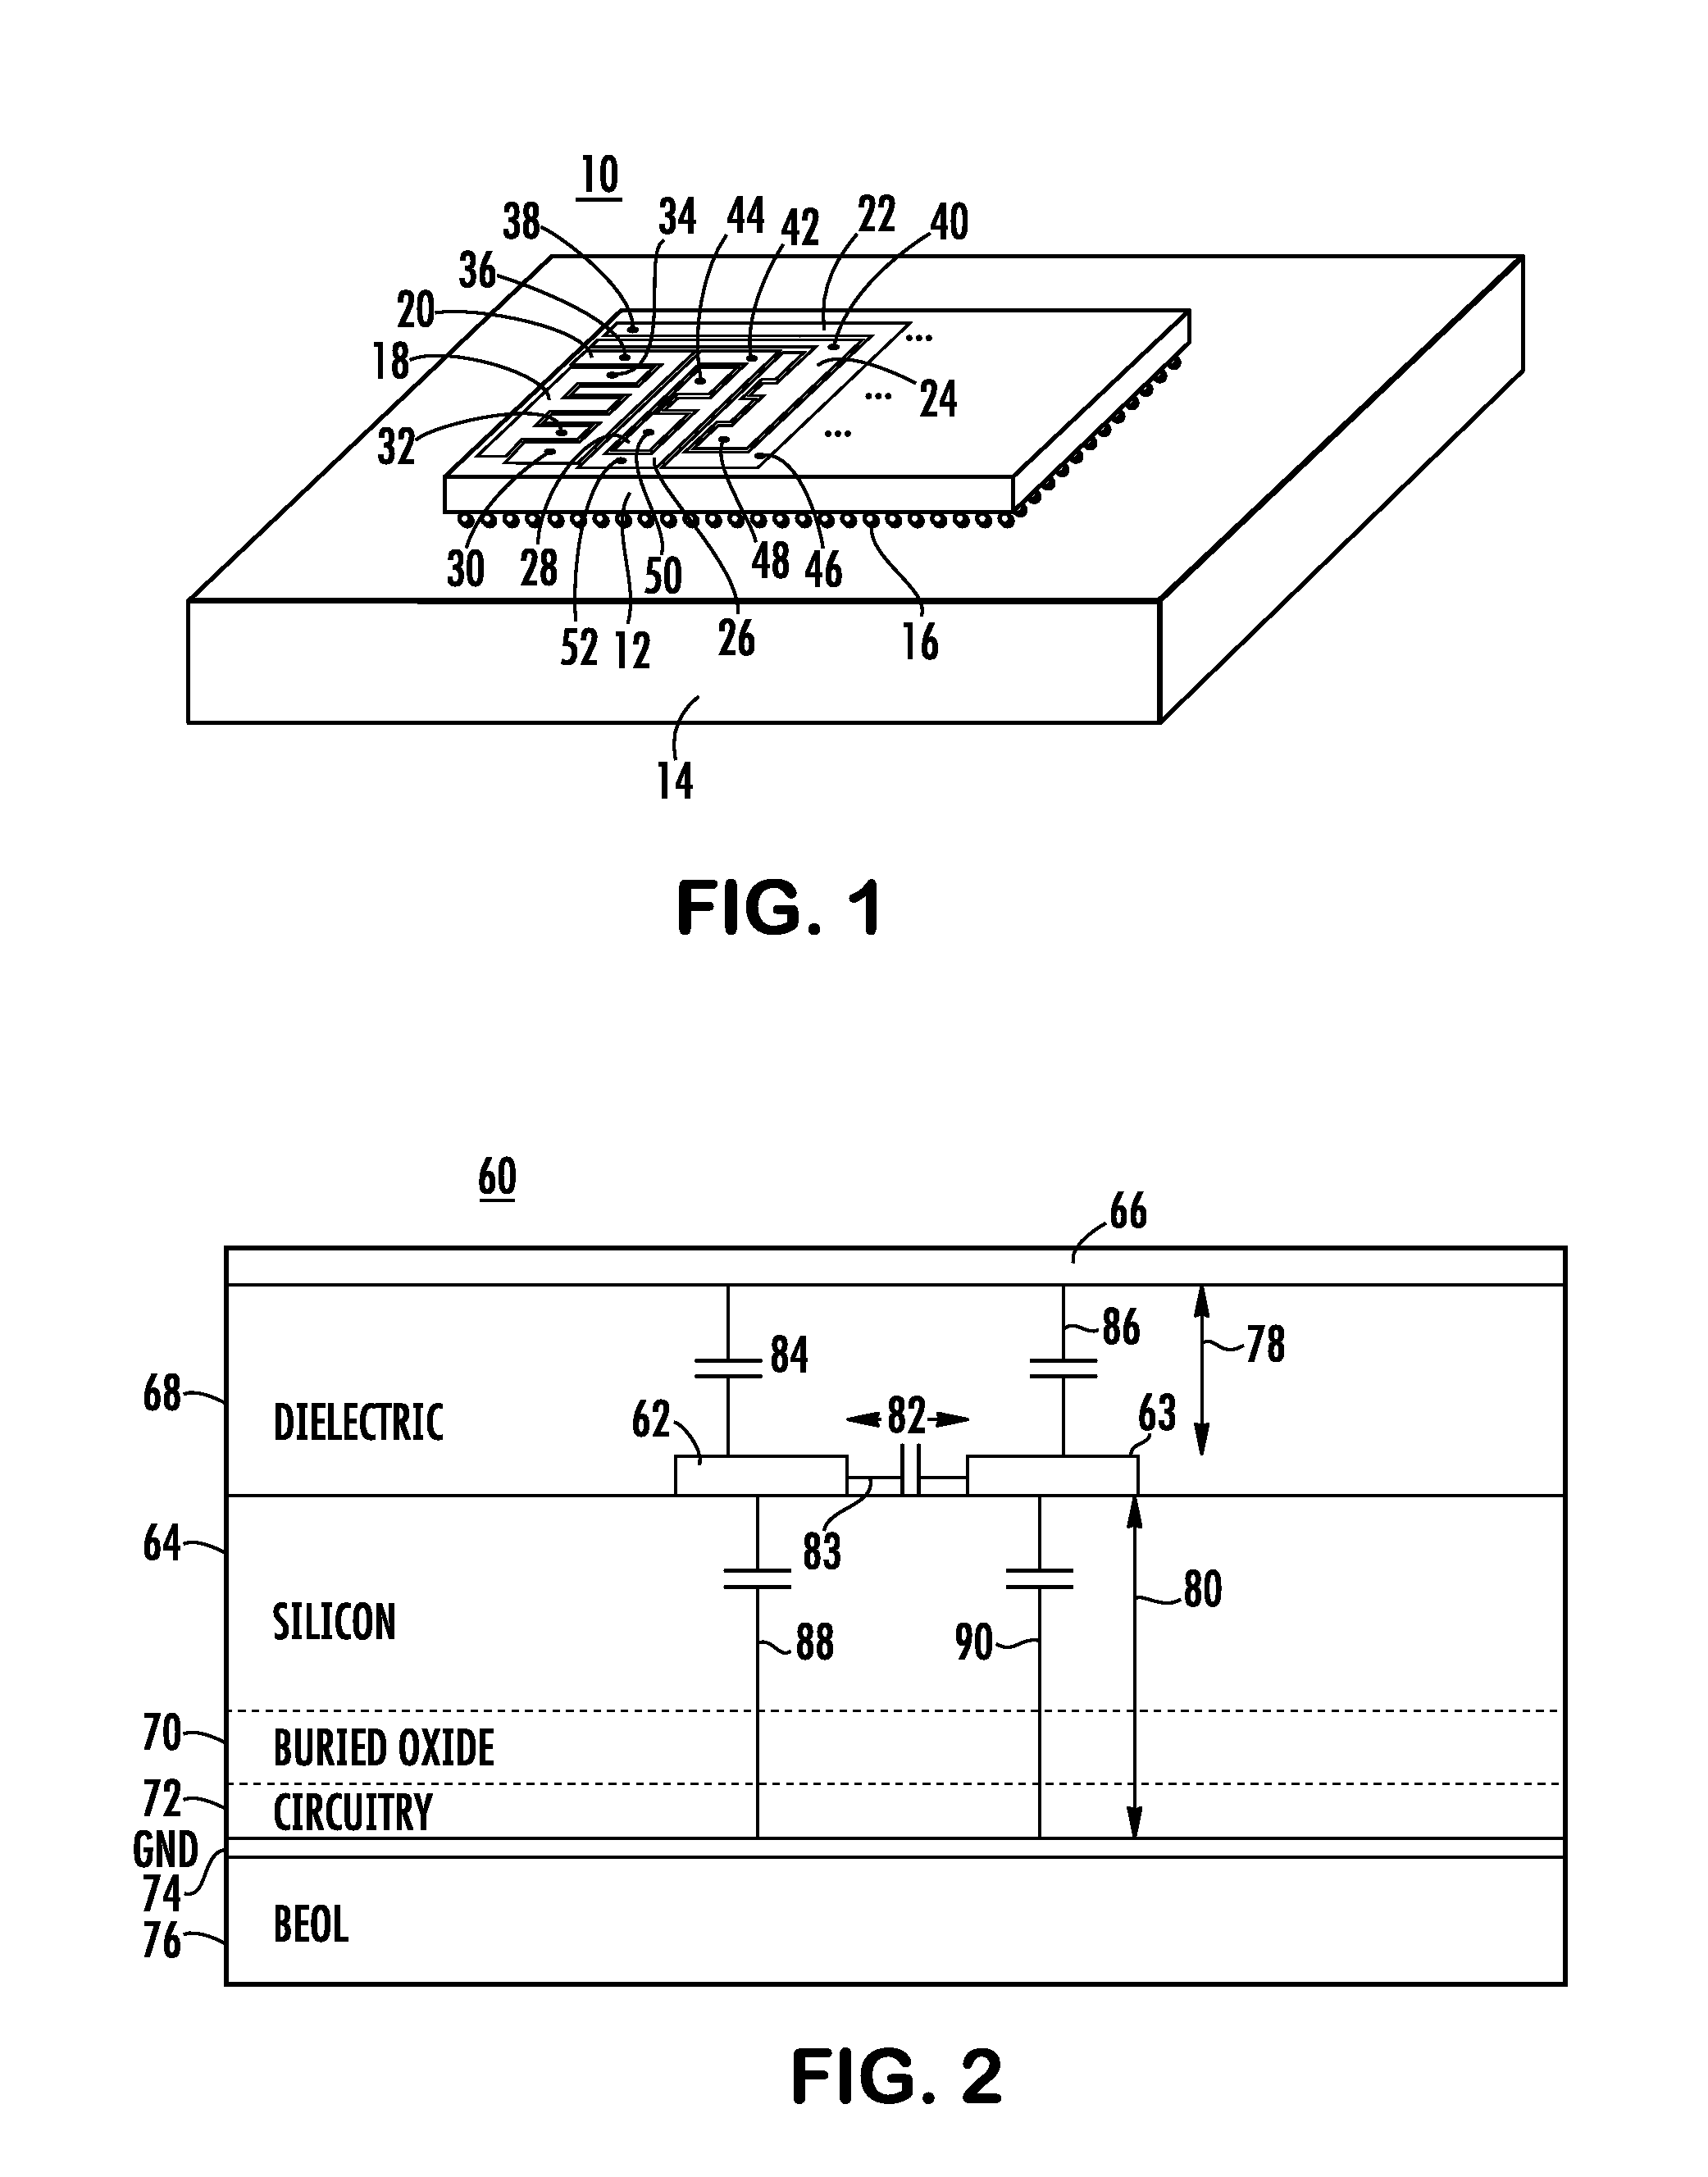 Capacitance Structures for Defeating Microchip Tampering